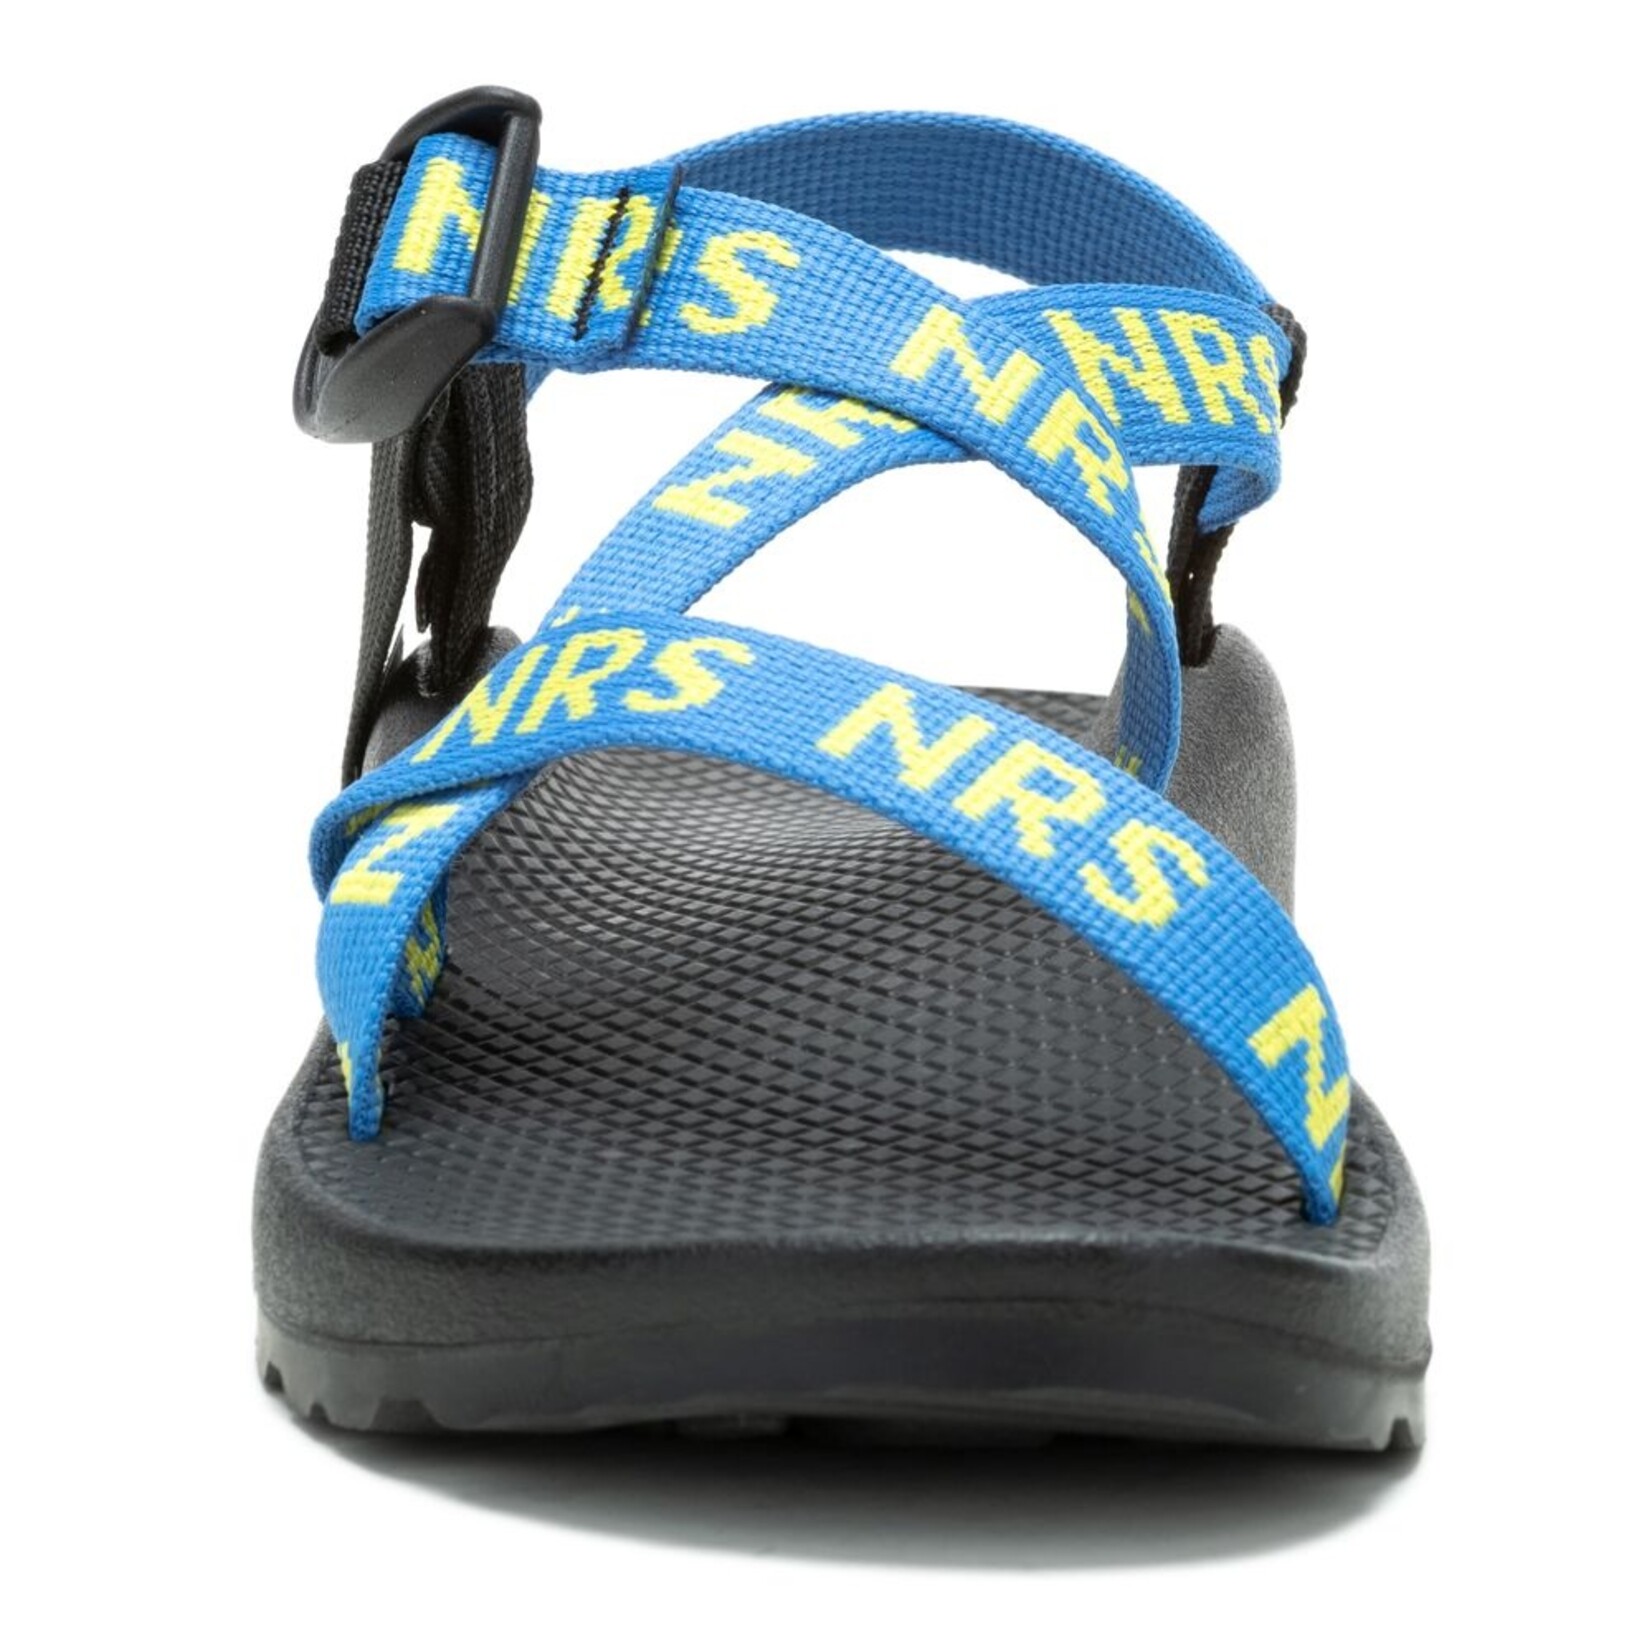 Chaco Chaco Men's Z/1 Classic with NRS Strap Webbing - Closeout